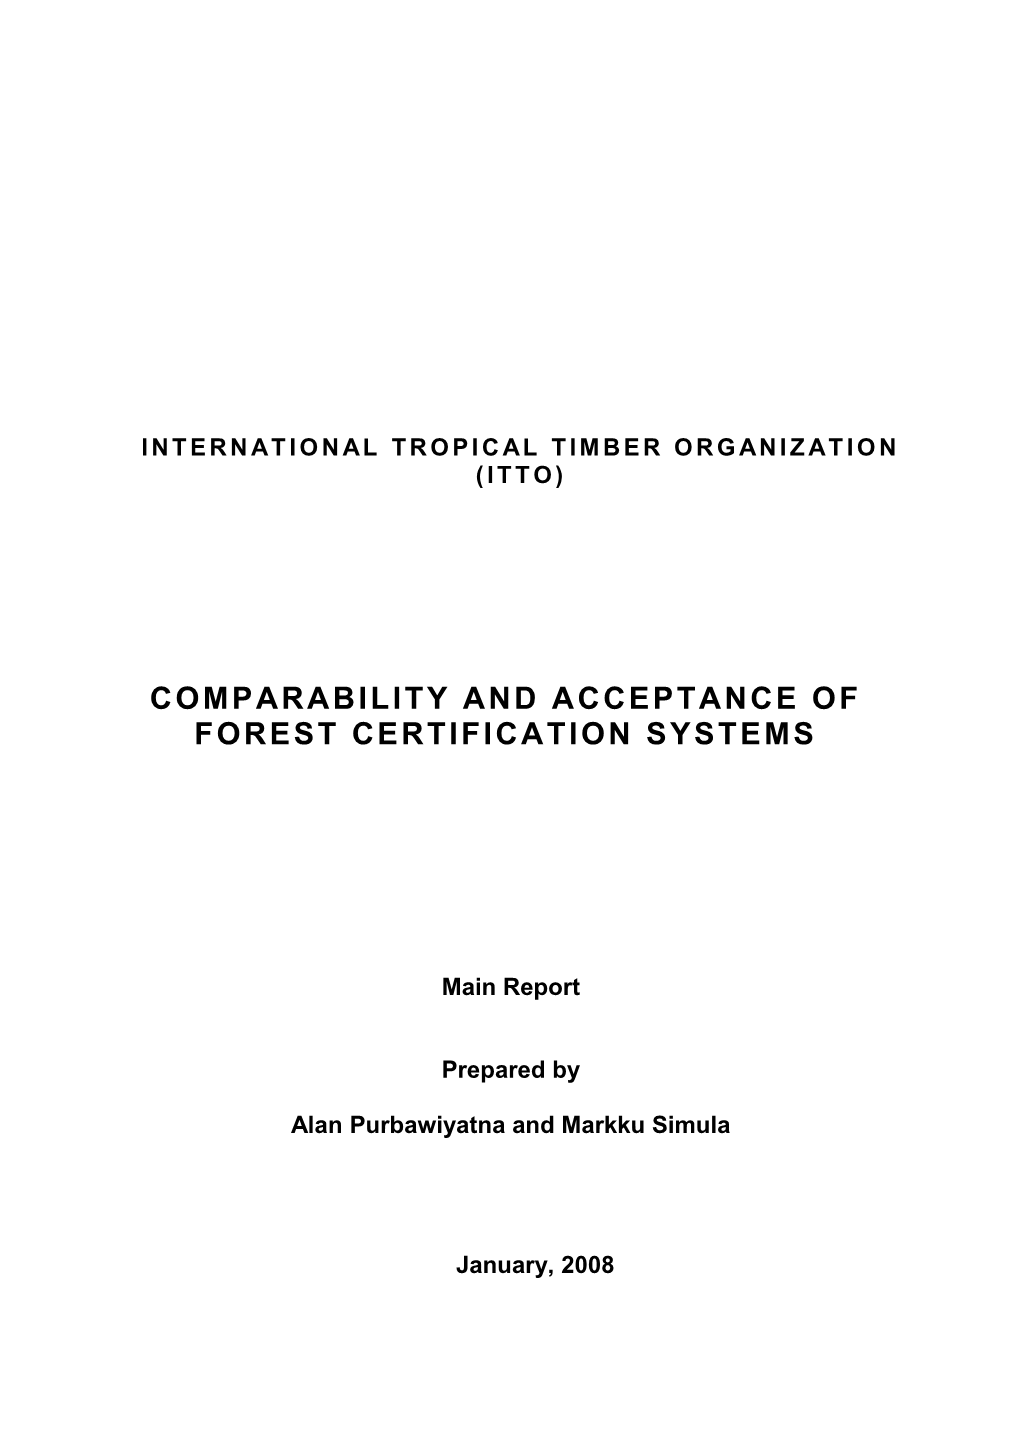 Comparability and Acceptance of Forest Certification Systems